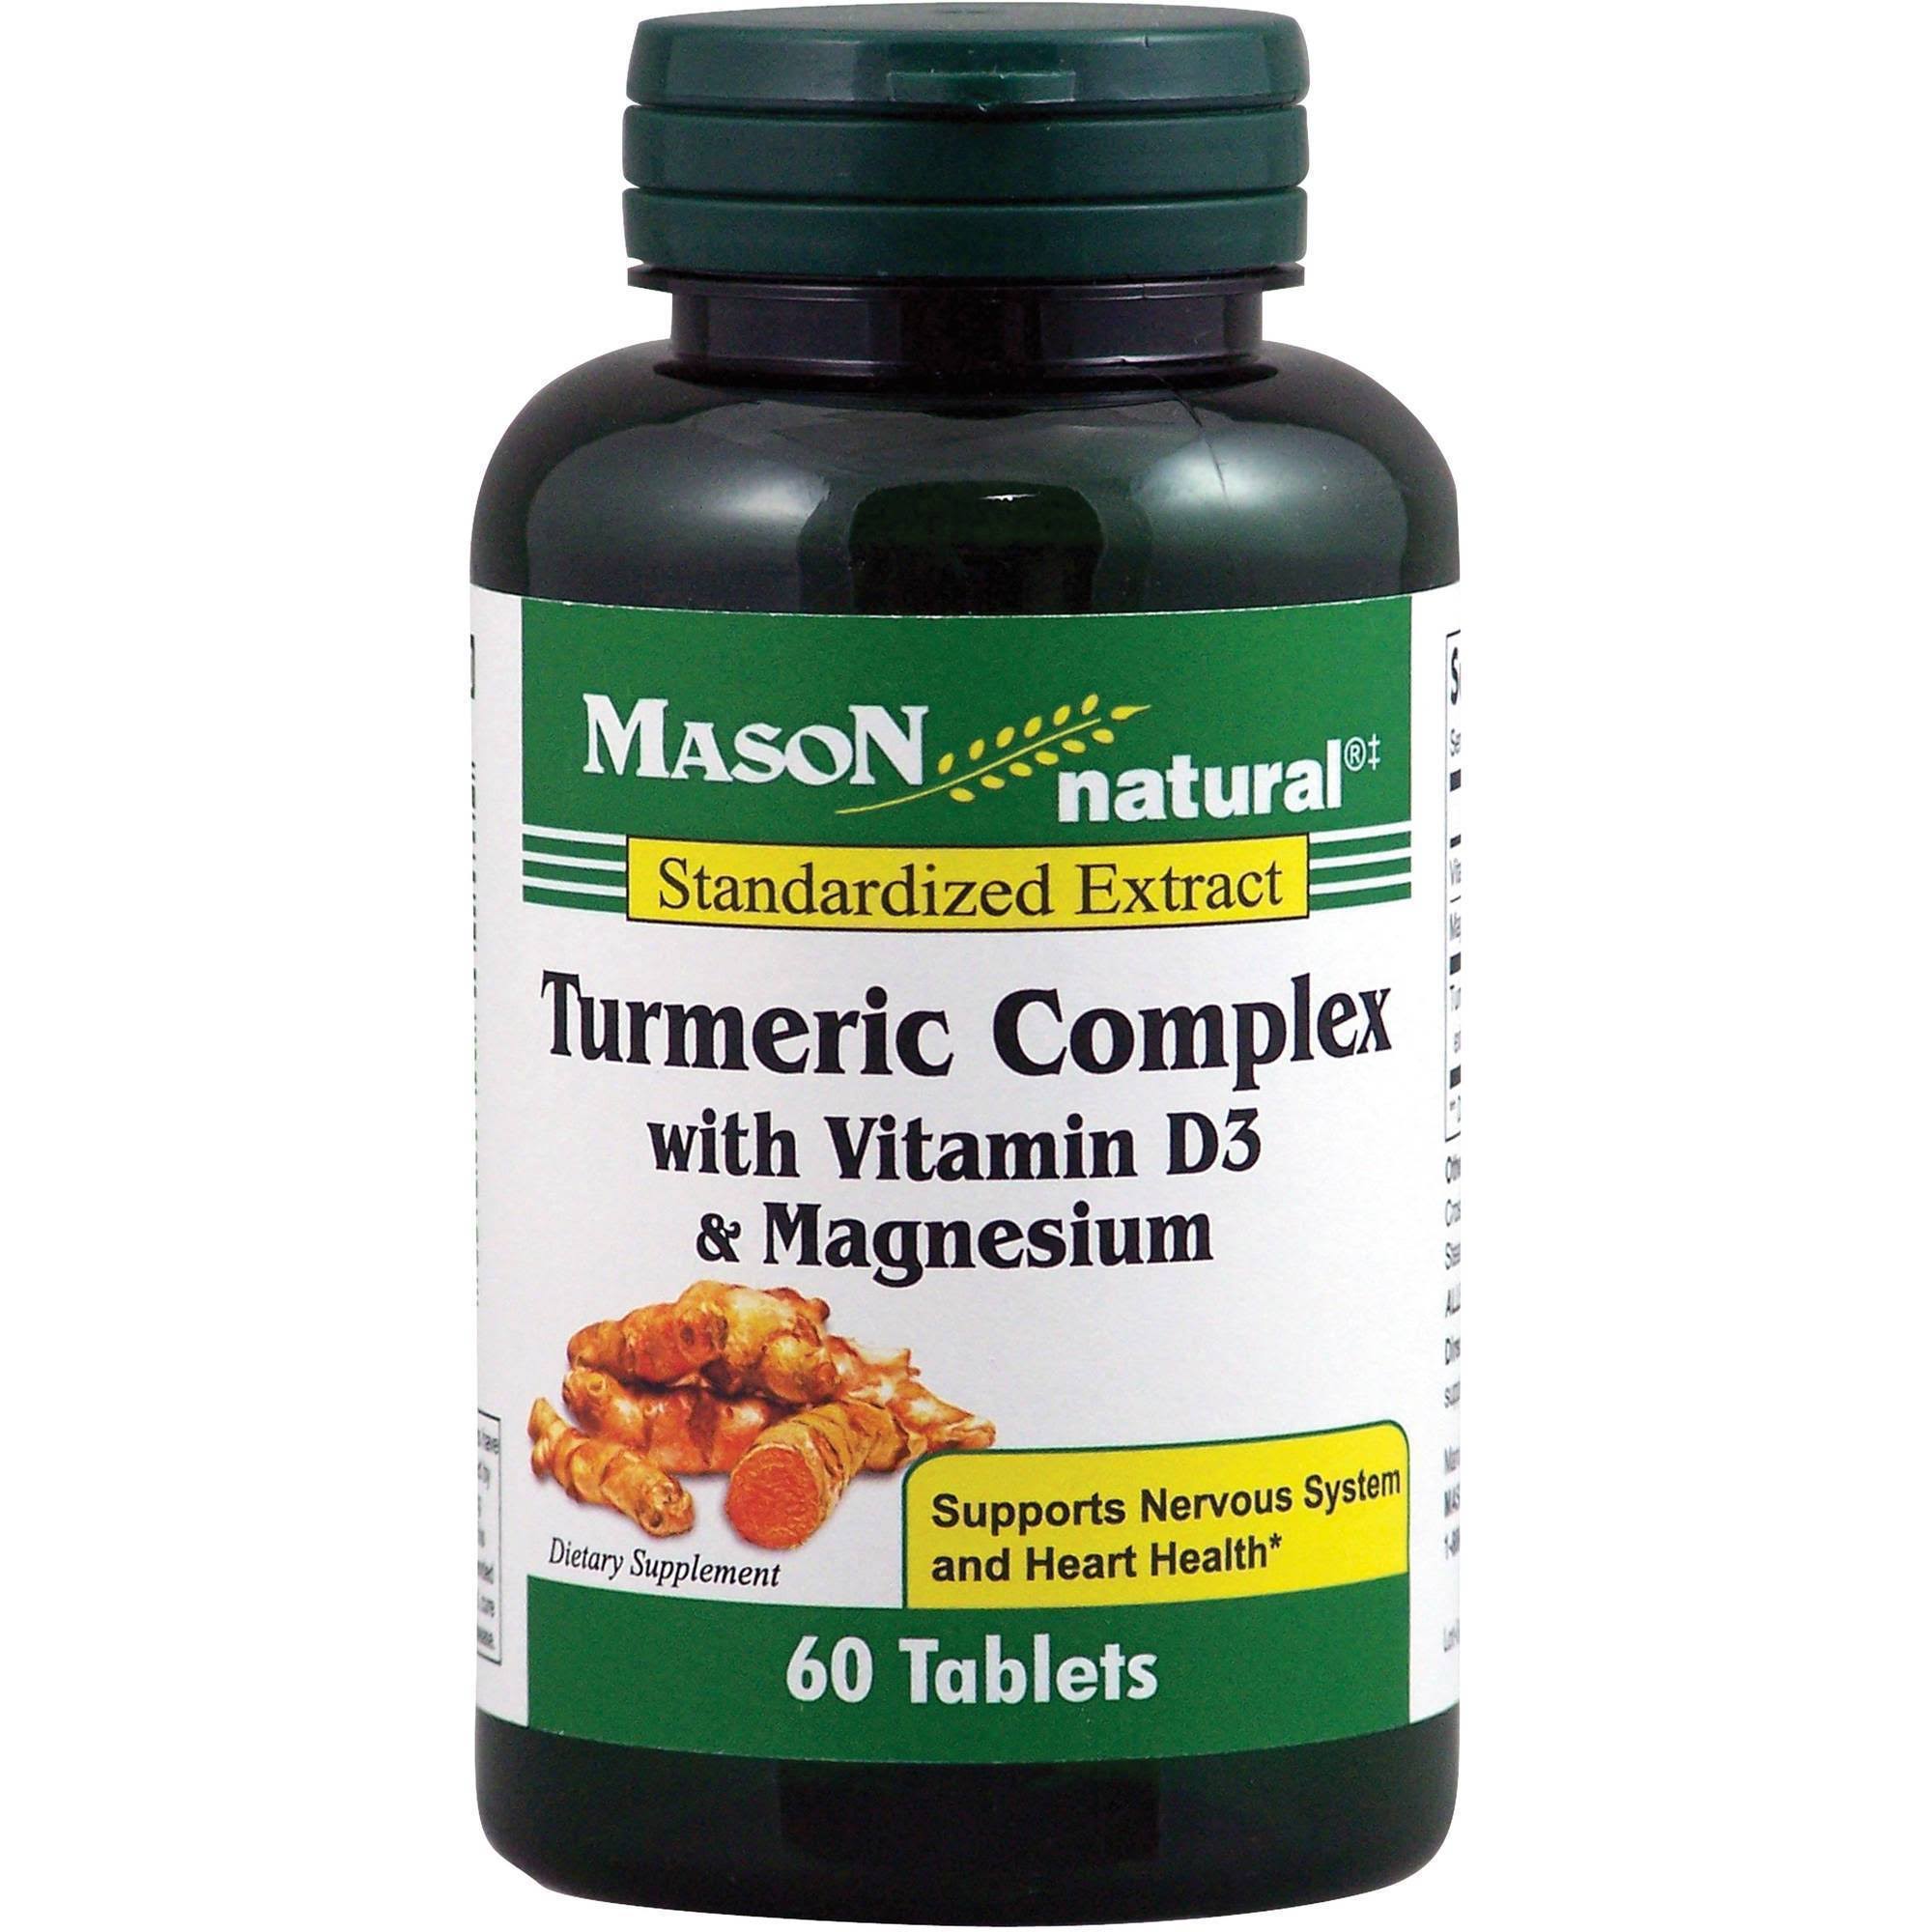 Mason Natural Turmeric Complex with Vitamin D3 & Magnesium Dietary Supplement